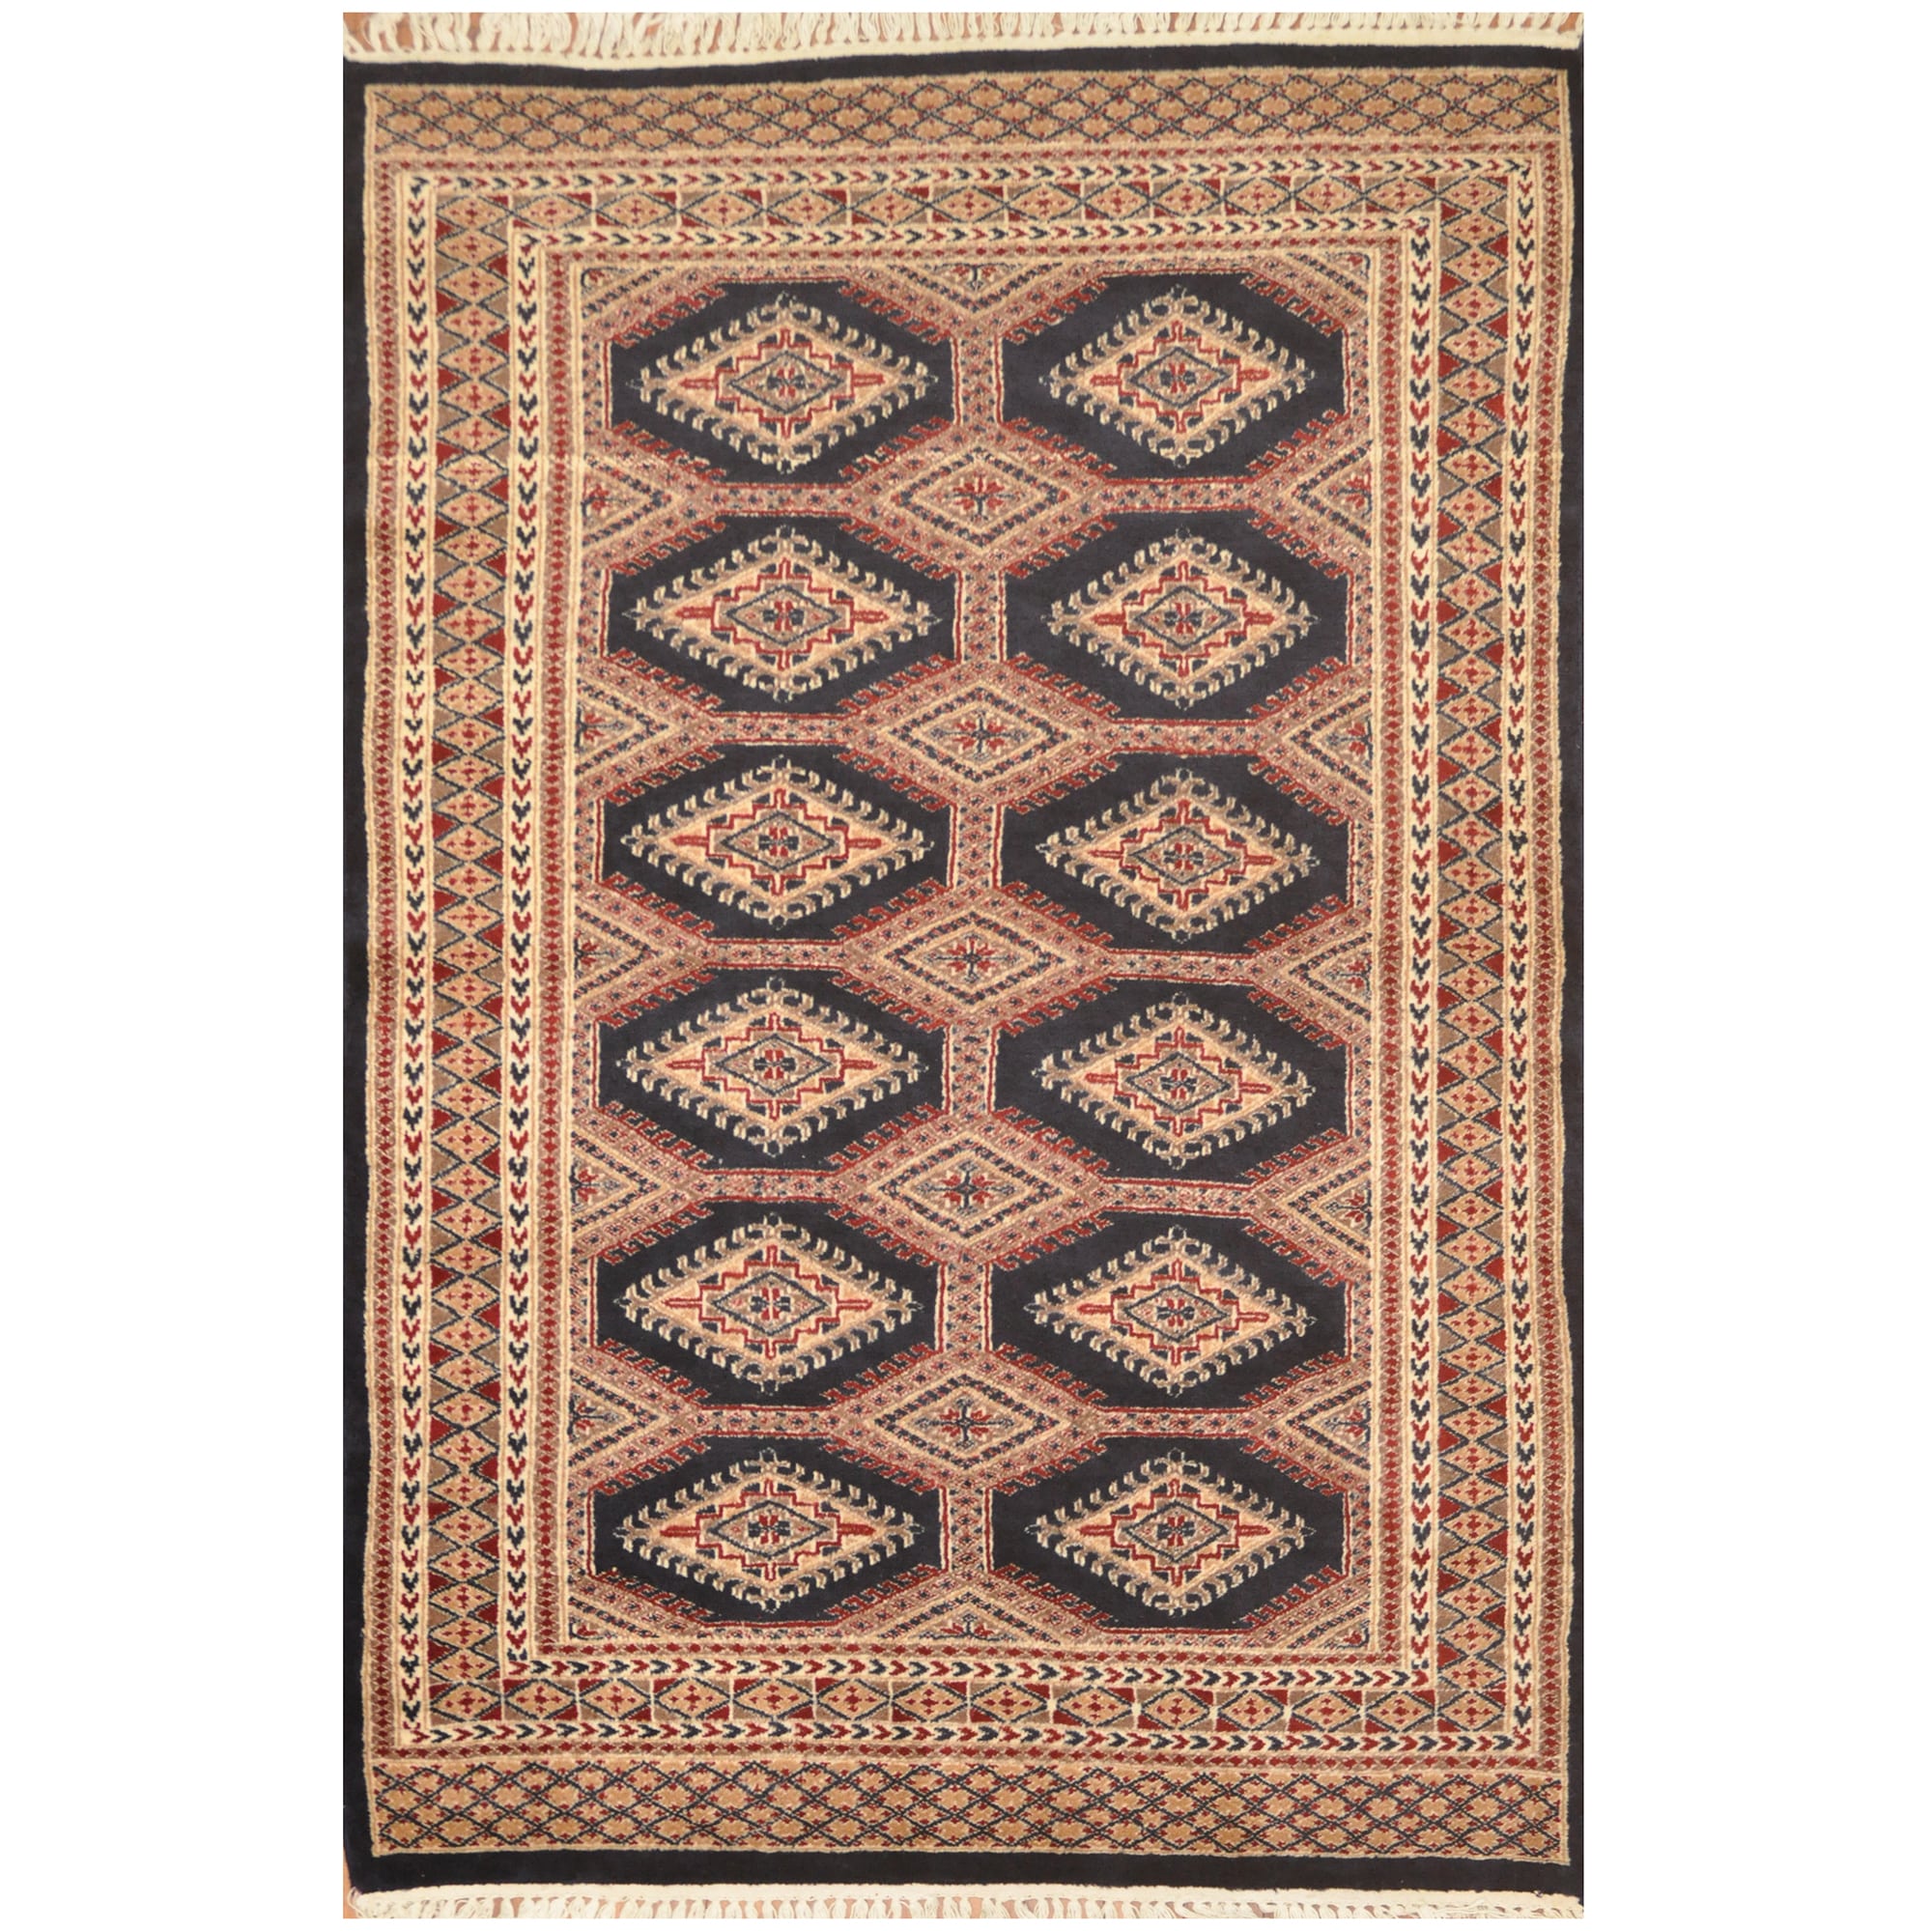 Stani Hand Knotted Bokhara Wool Rug 4 X 5 10 Herat Oriental Rugs